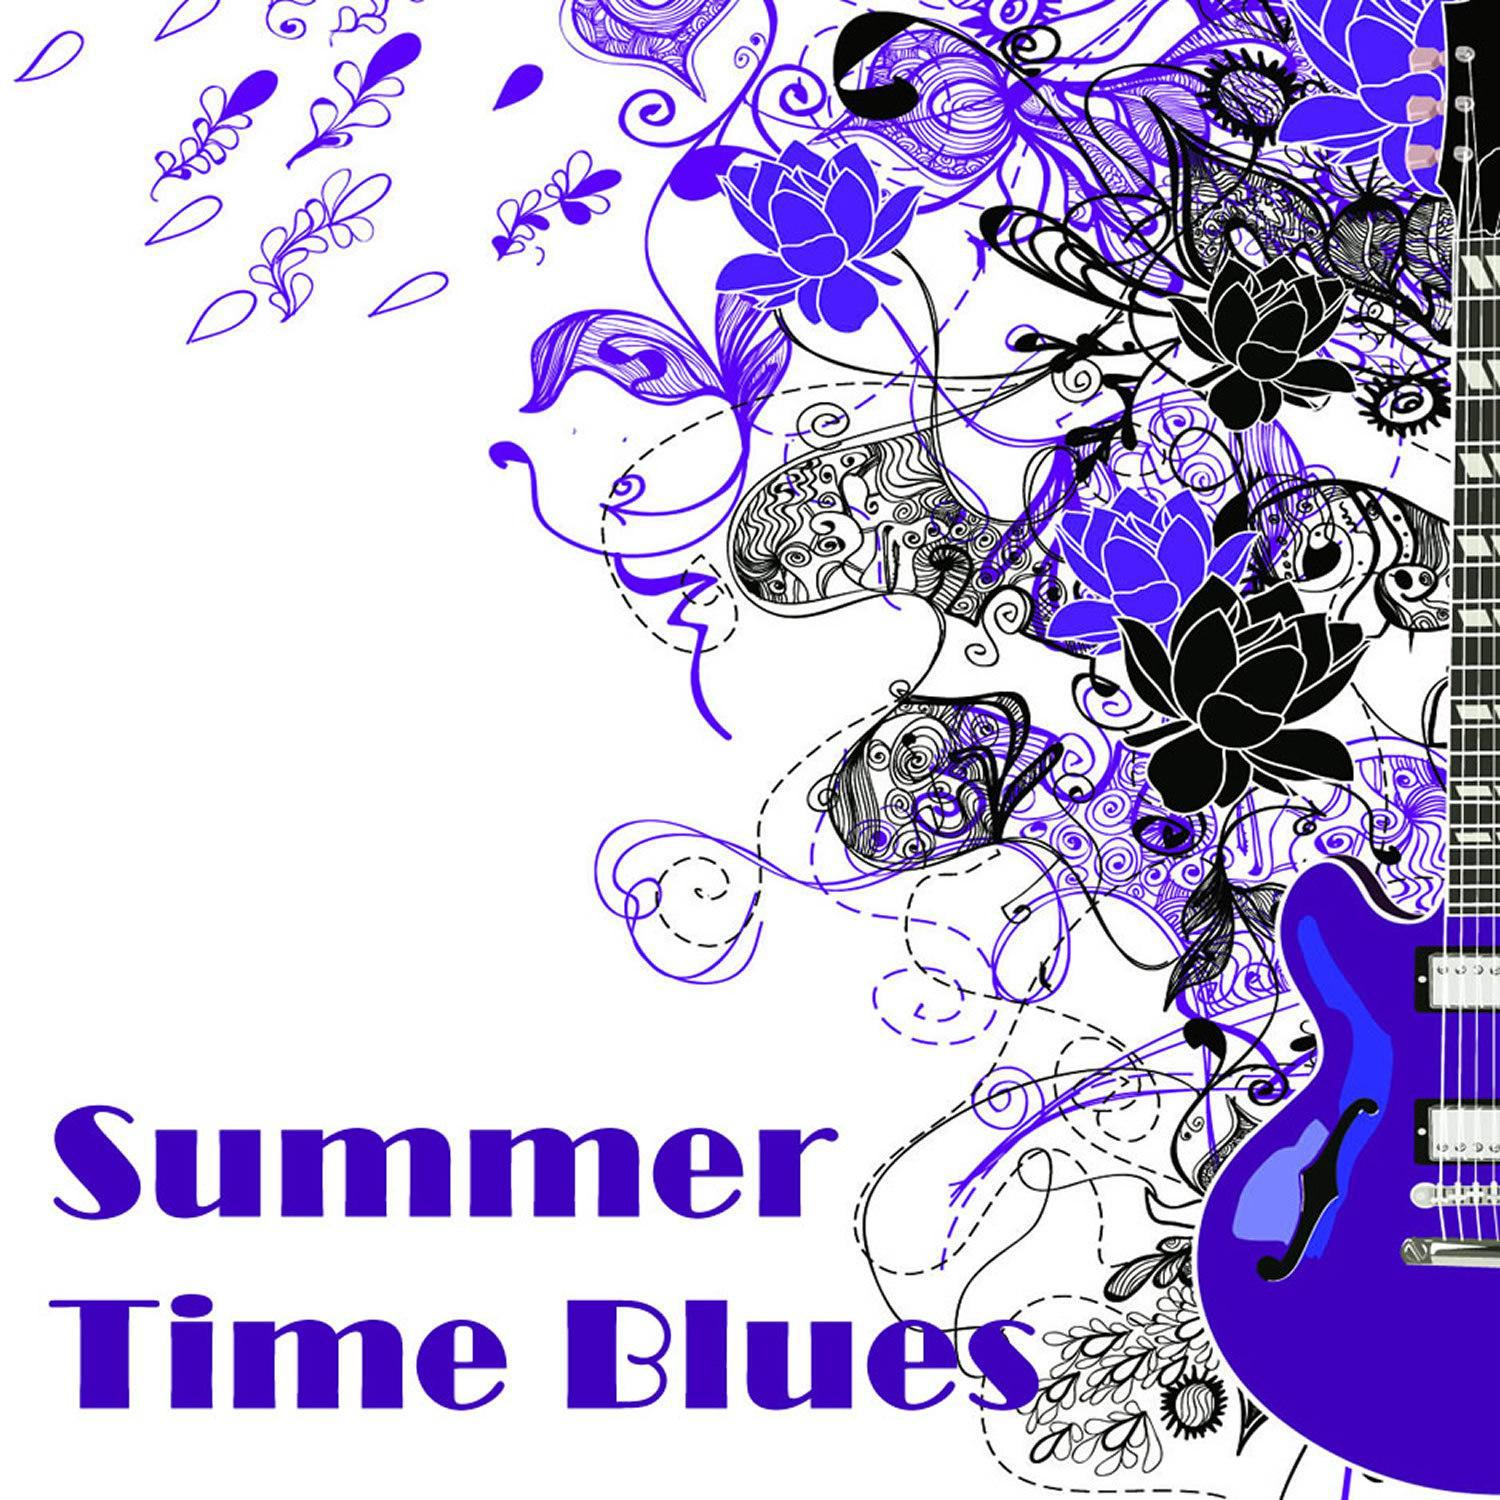 Summertime Blues, The Best of Oldies Rock by the Beach Boys, Bobbie Darin, Buddy Holly, The Coasters, Eddie Cochran, Link Wray, Ritchie Valens & More!